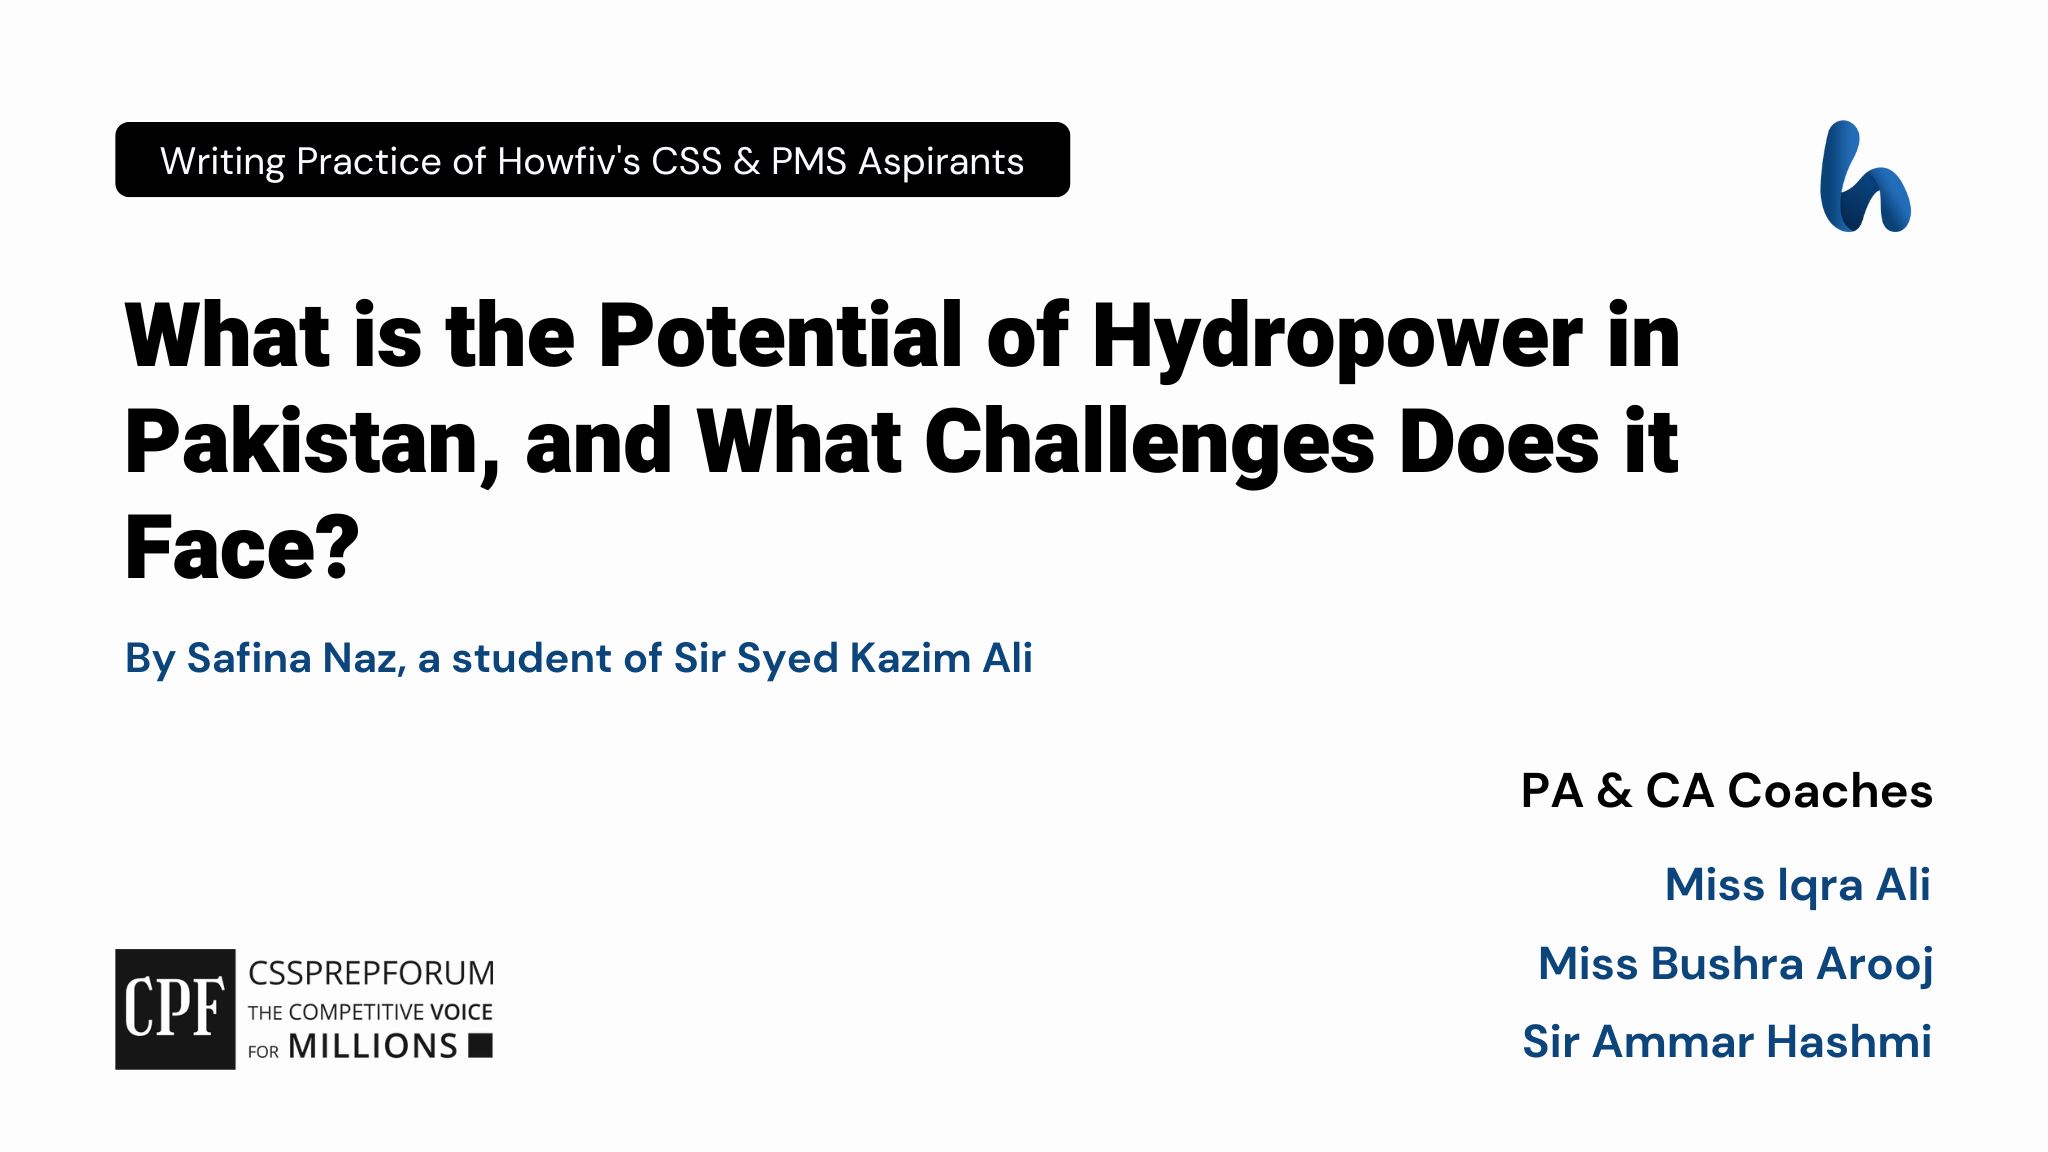 CSS Current Affairs article | Potential of Hydropower in Pakistan | is written by Safina Naz under the supervision of Sir Ammar Hashmi...